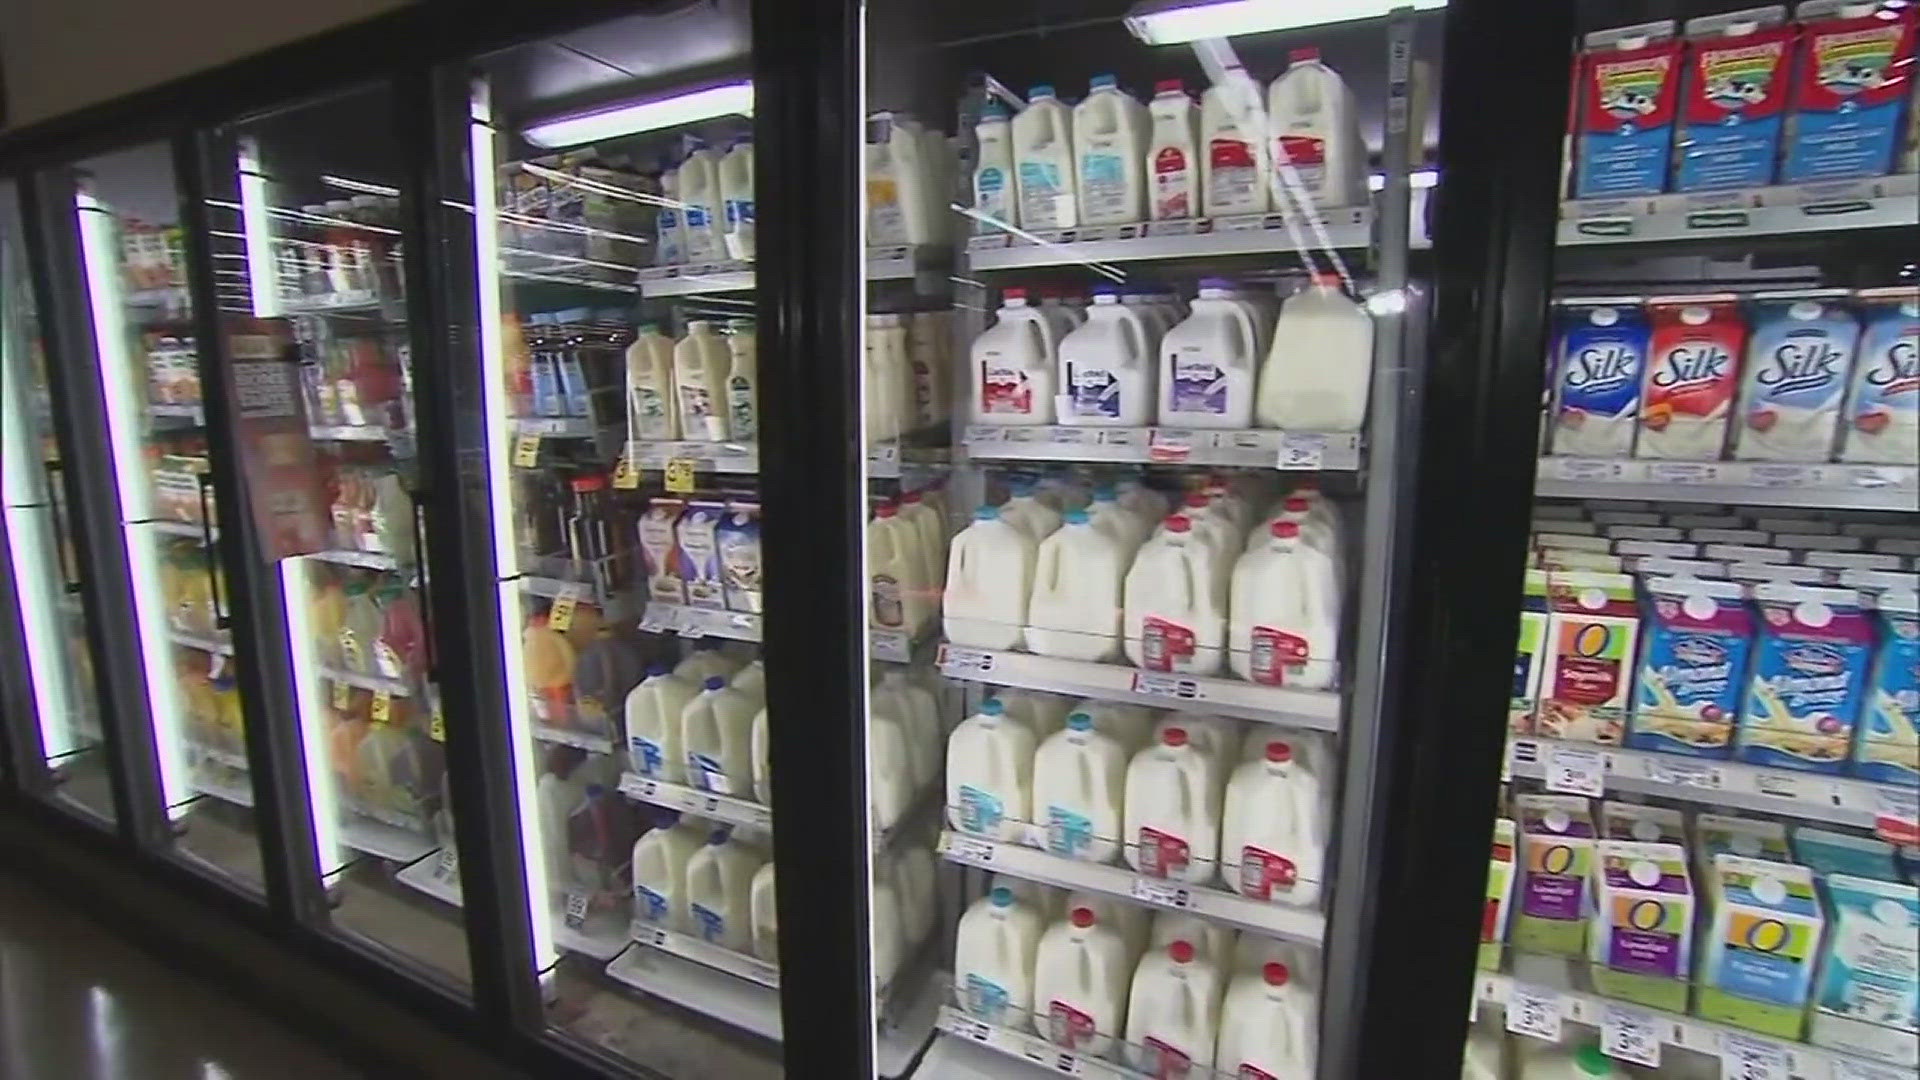 The FDA is issuing a warning after discovering the virus in some milk samples. The virus was specifically found from milk in some grocery stores across the U.S.